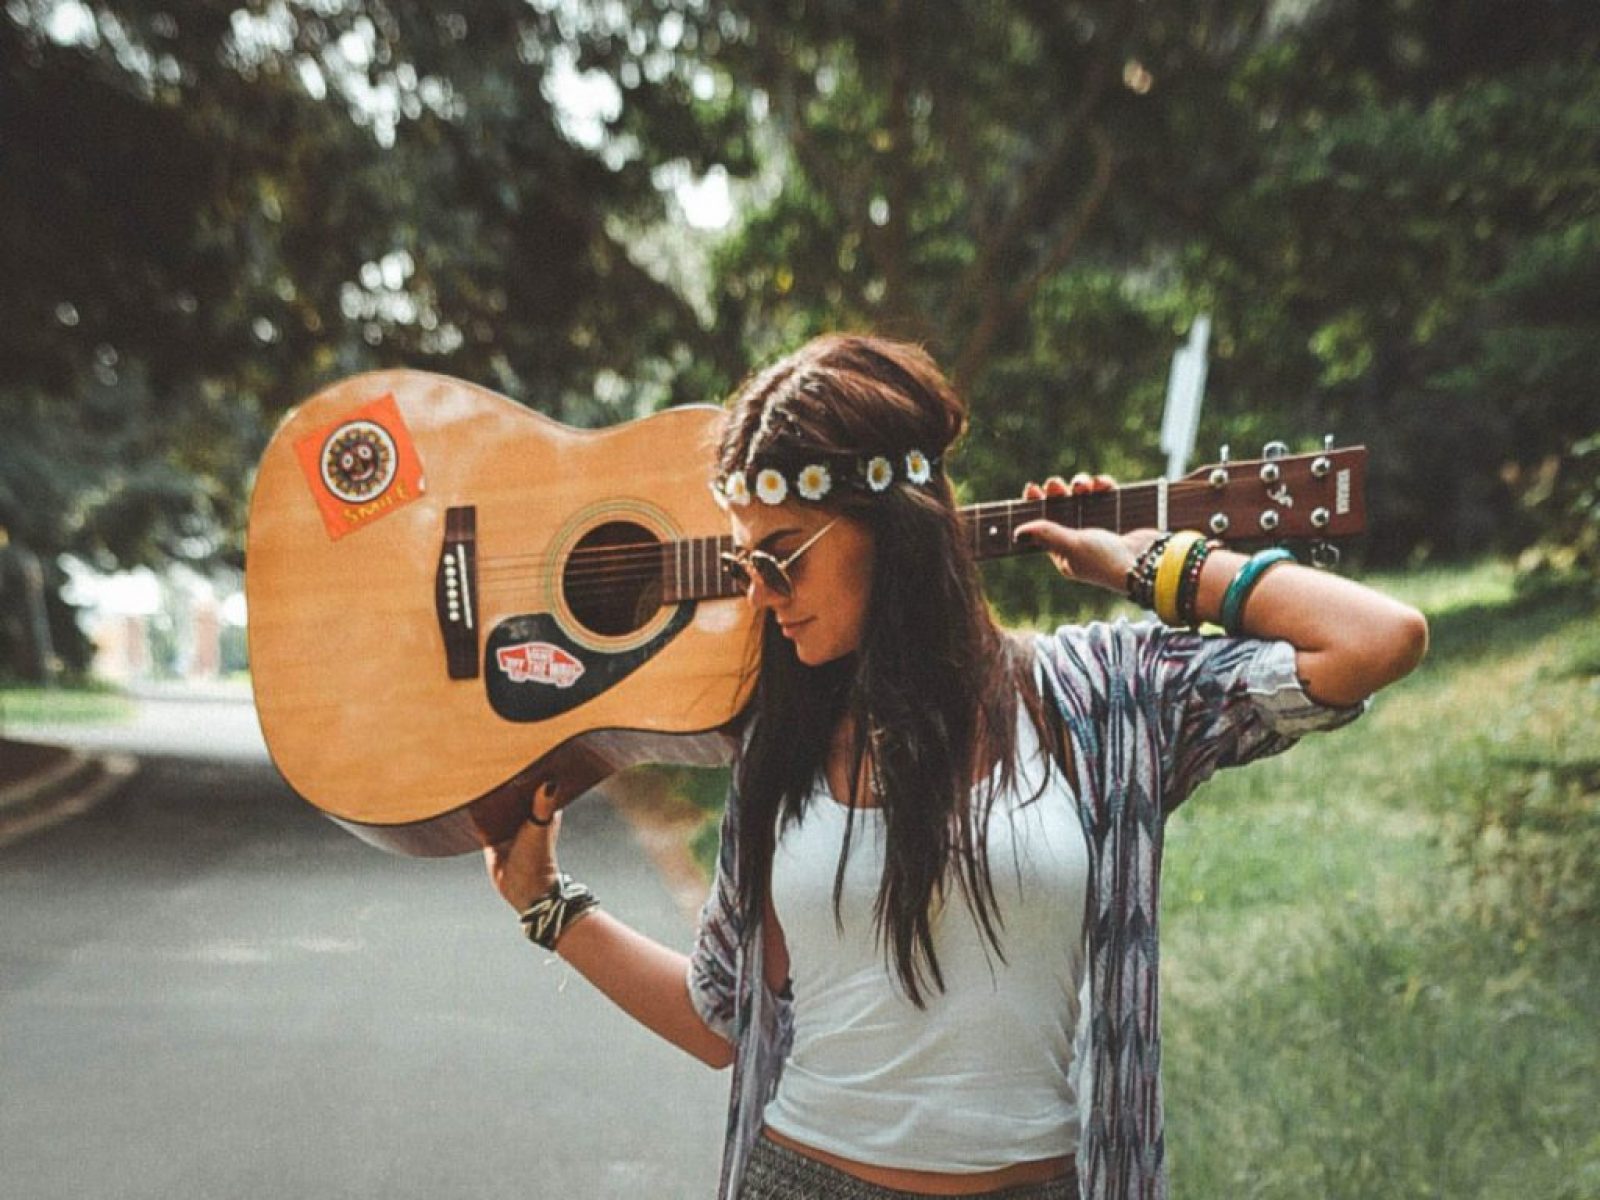 A girl wearing boho clothes and walking with a guitar